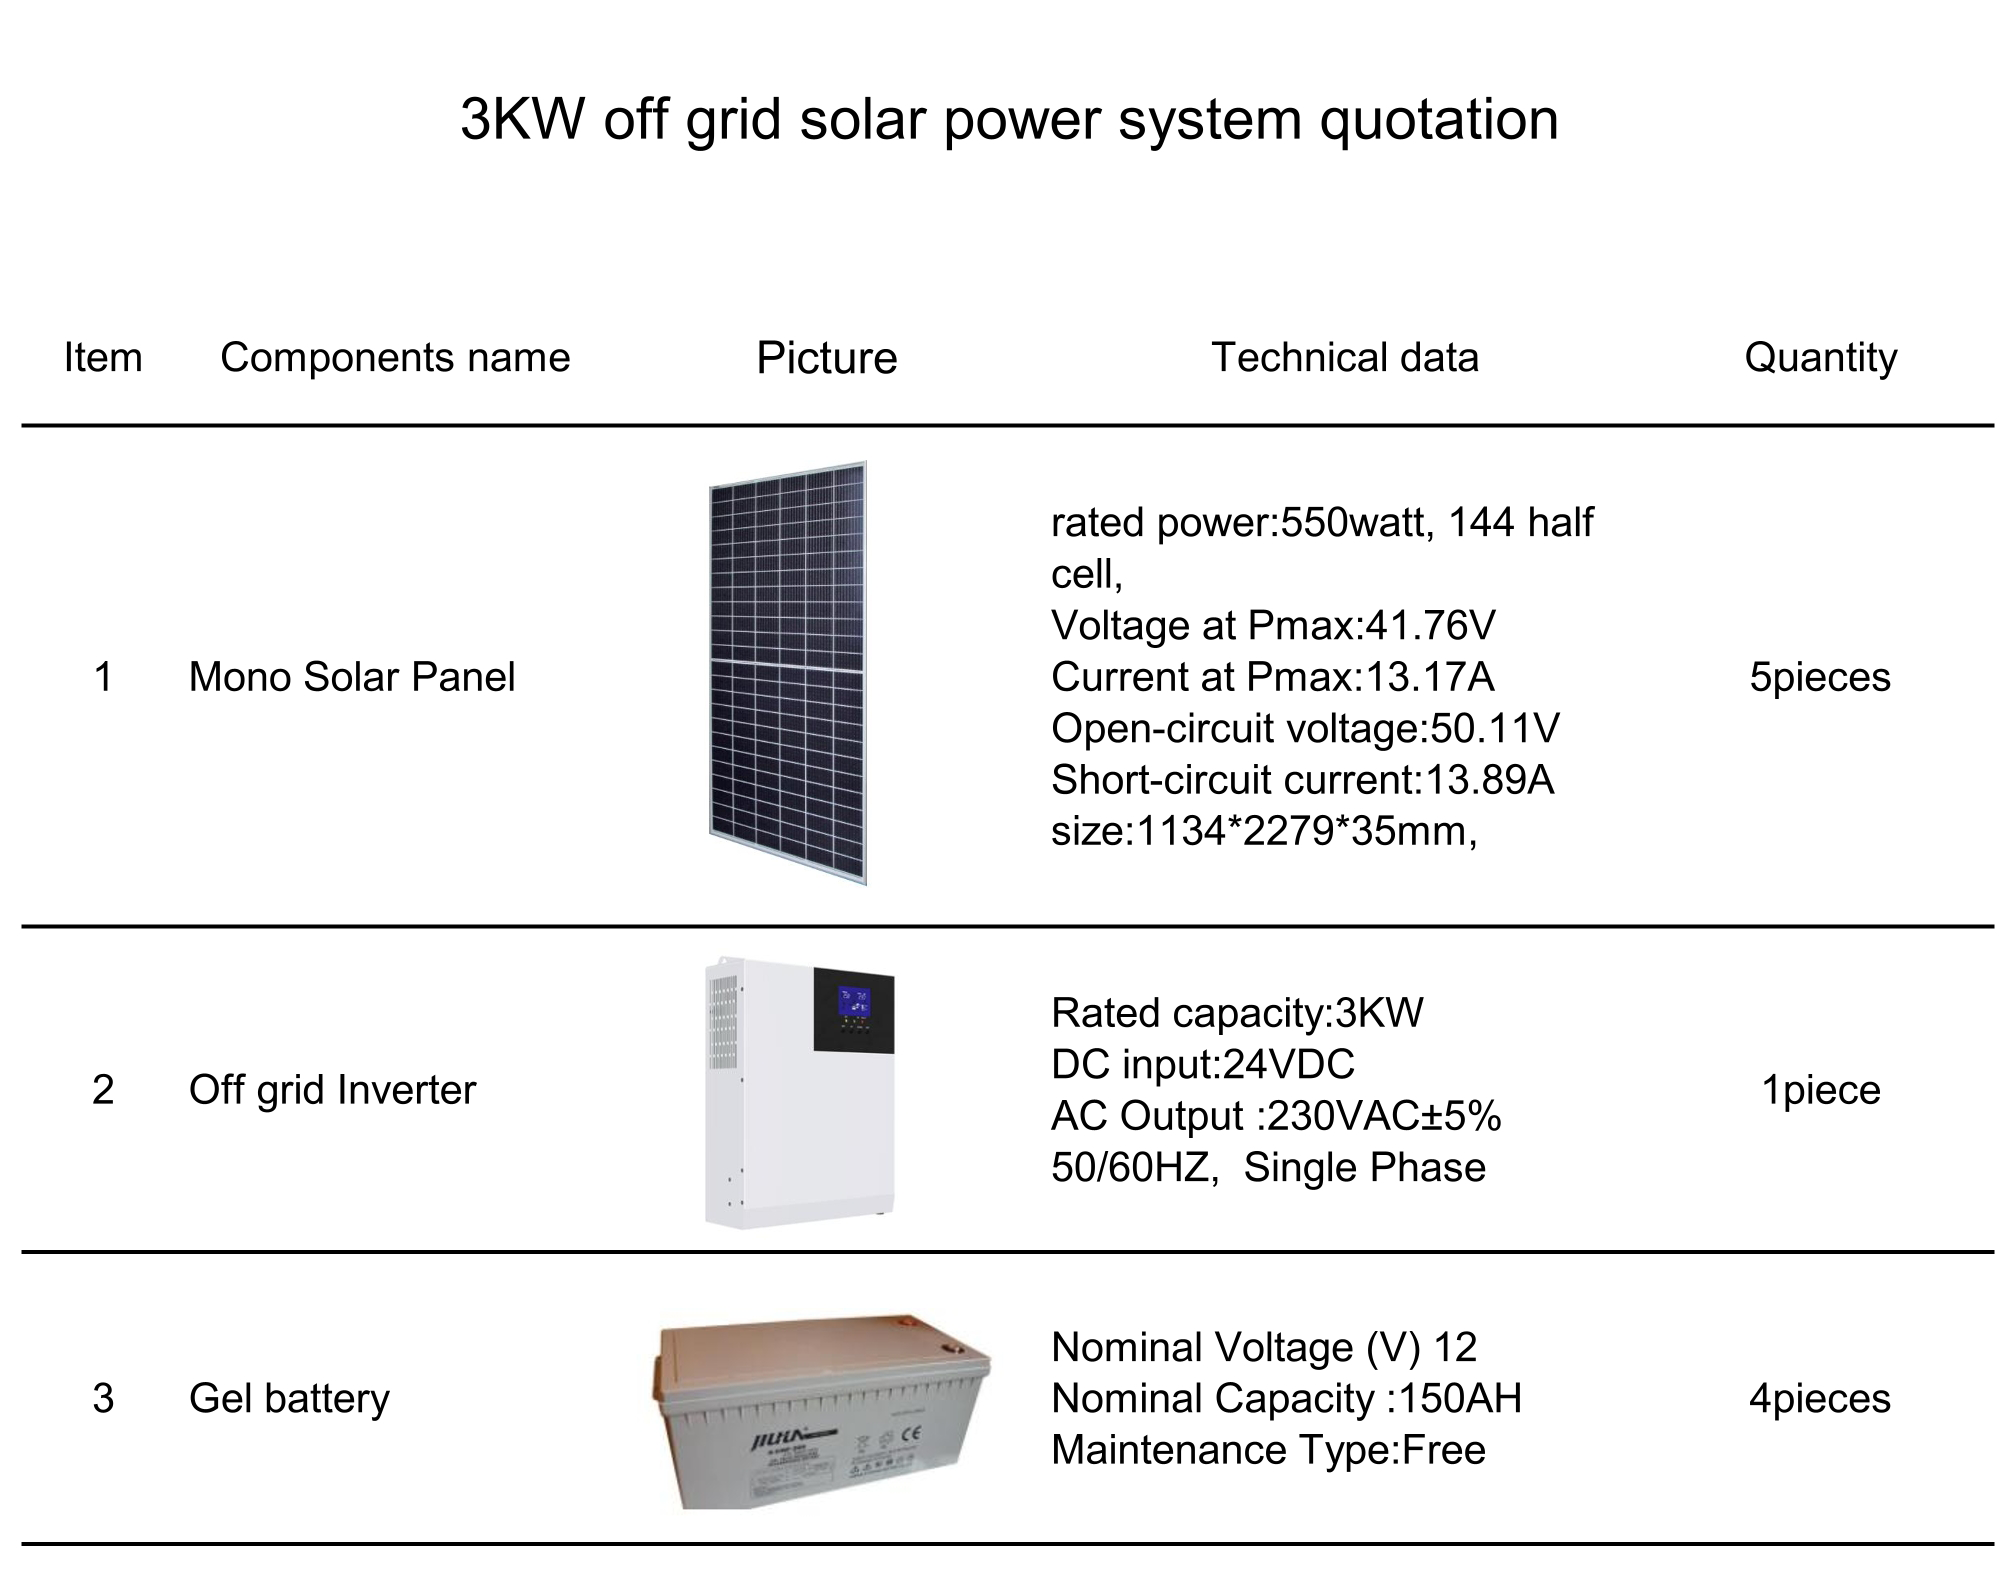 Edobo solar 3kw off-grid solar system Wholesale Cost effective all in one portable solar power system